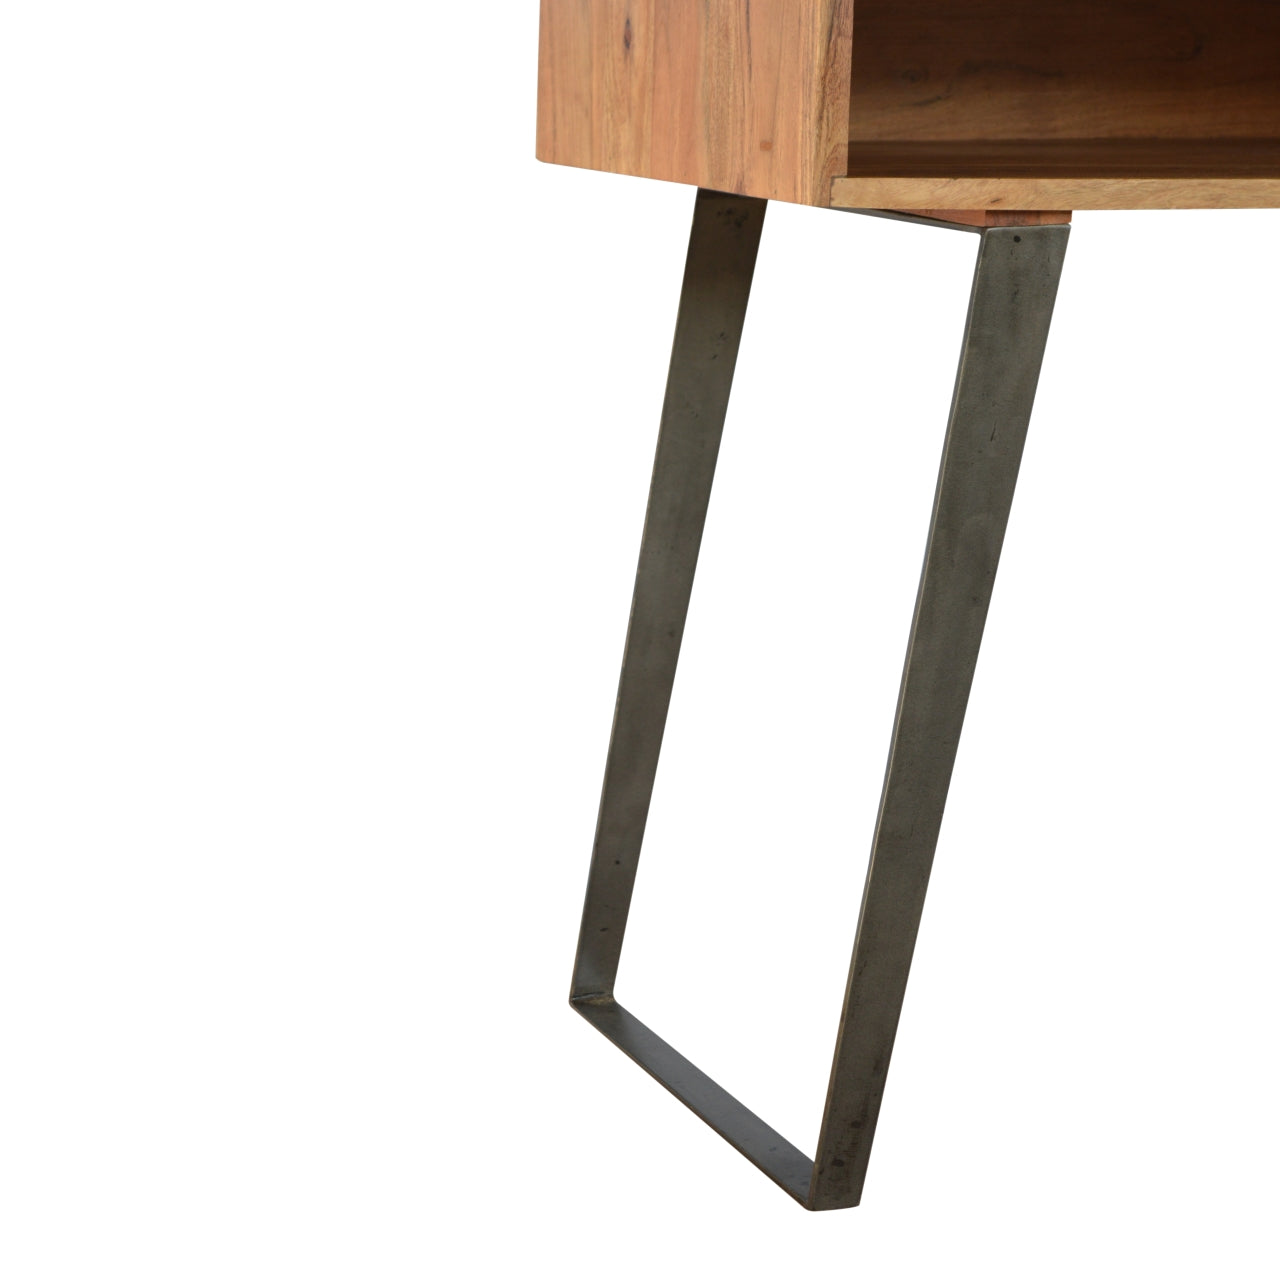 Solid Wood Writing Desk With Iron Legs